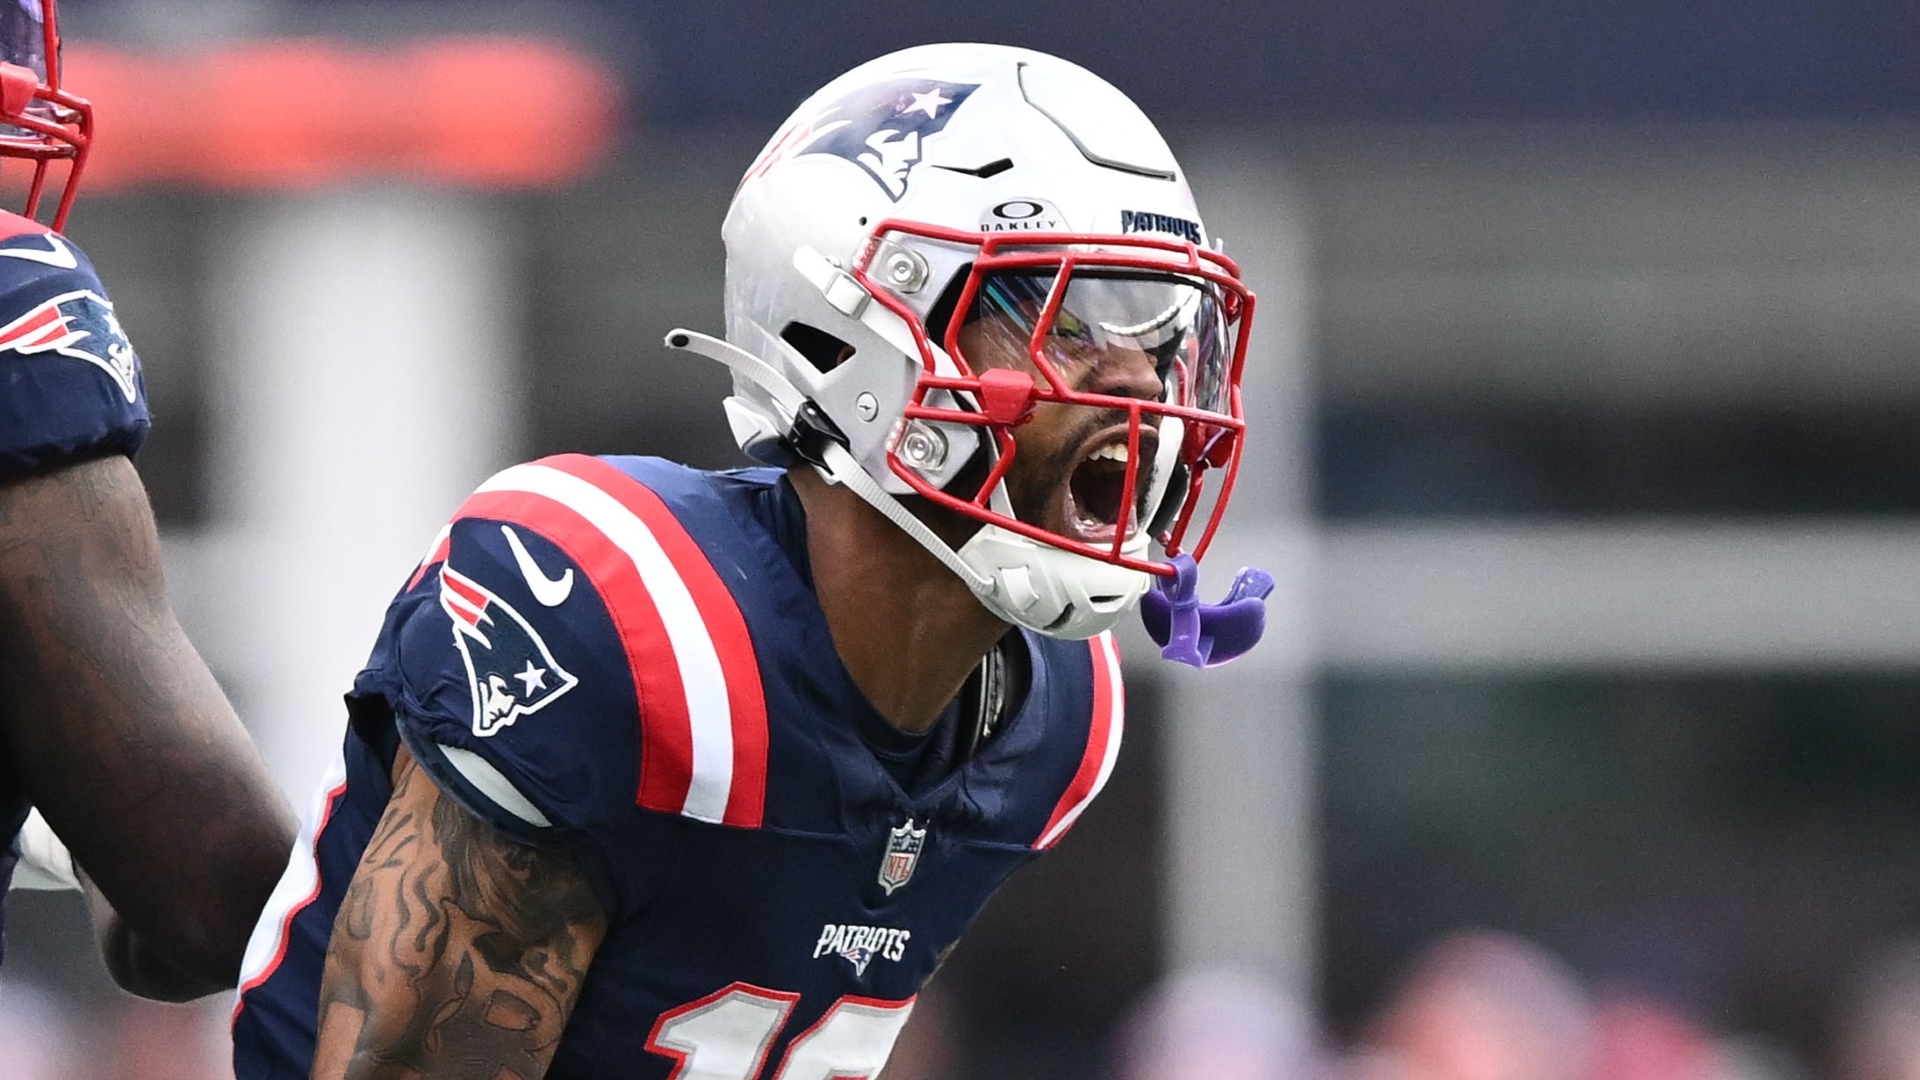 Jack Jones posted his reaction to being released by the Patriots